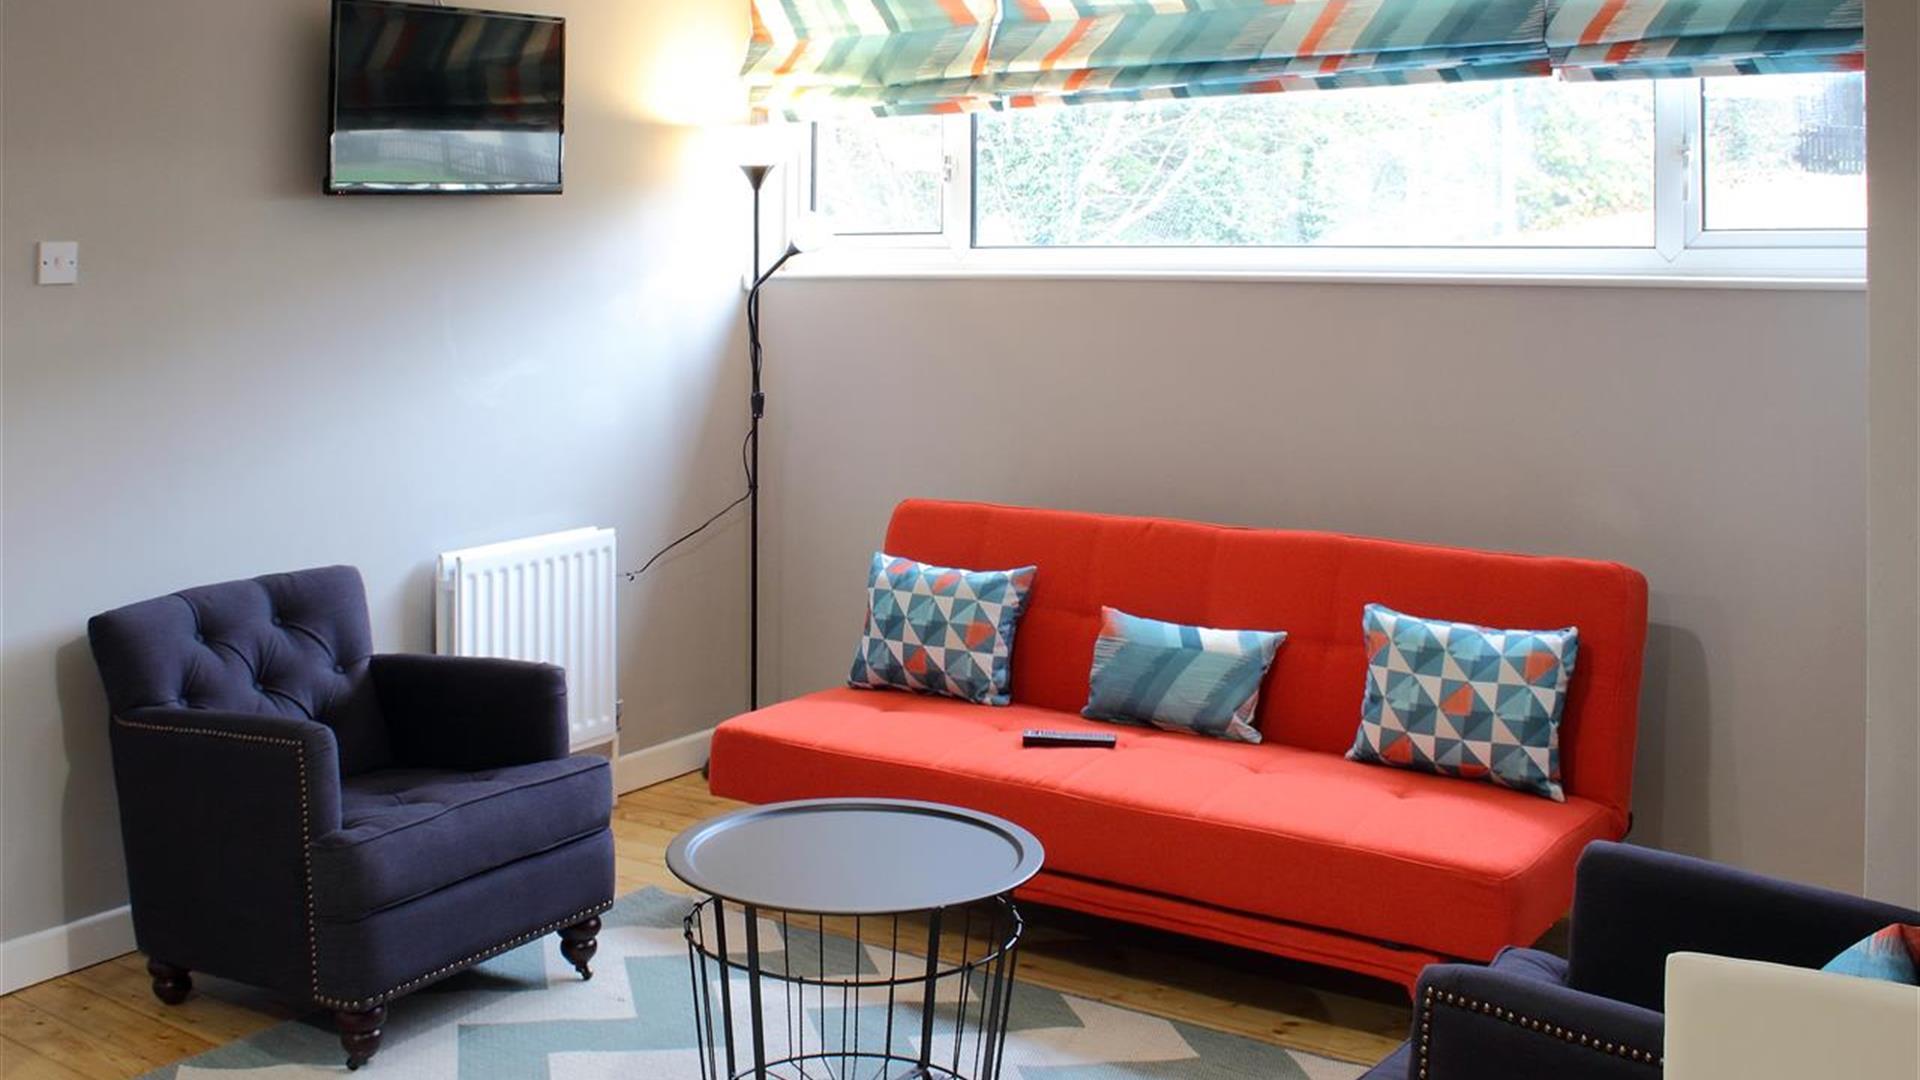 living area with orange sofa and 2 navy armchairs